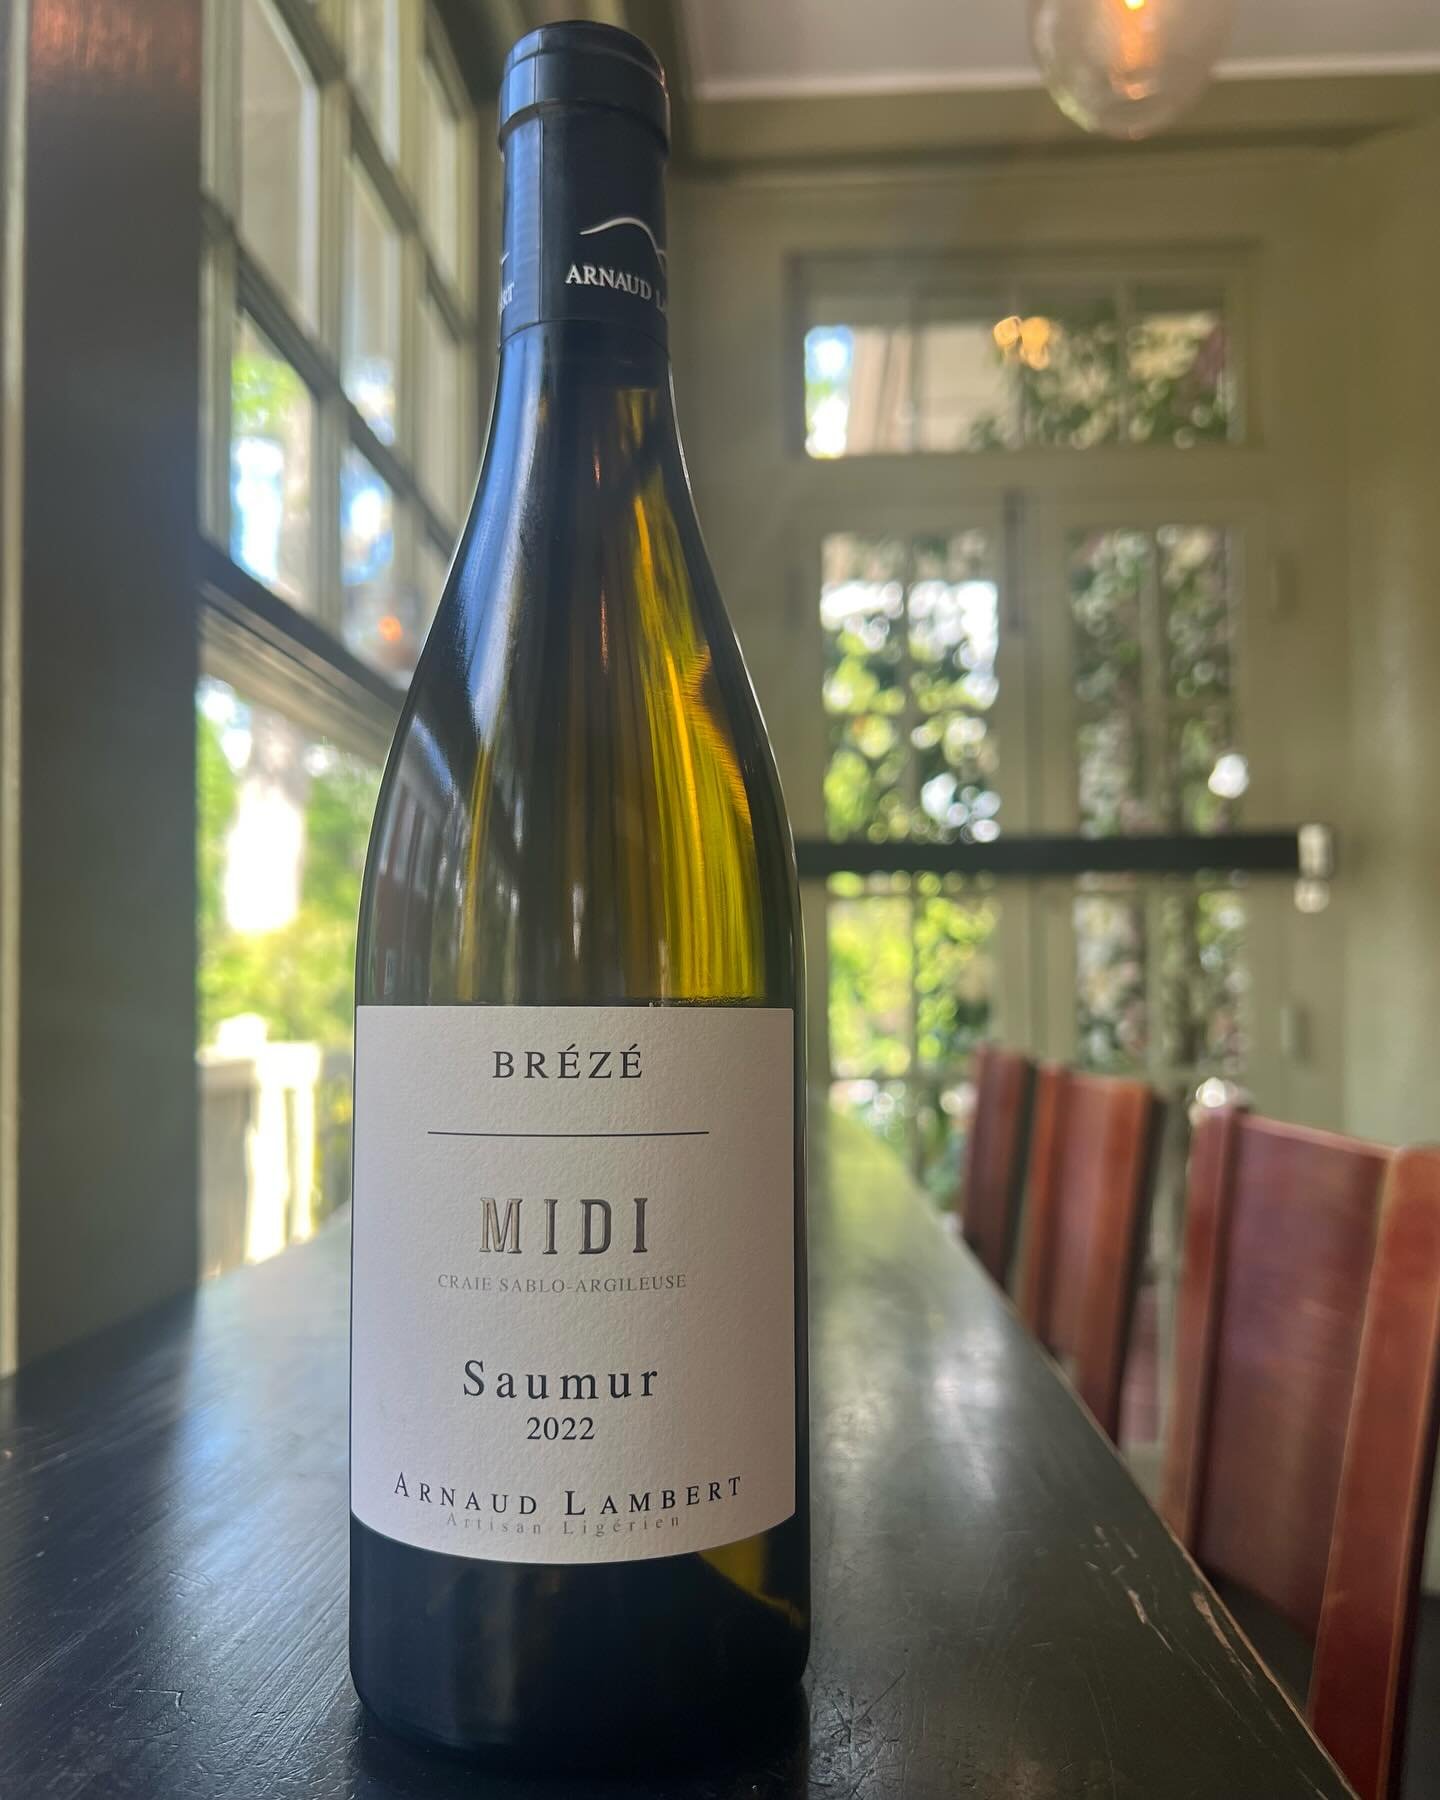 Hello Chenin Blanc lovers! Our latest by-the-glass special is a regal dry style of Chenin from Br&eacute;z&eacute;, one of the finest sections of Saumur in France&rsquo;s Loire Valley. It&rsquo;s fresh but deep, and so very ready for springtime. It t